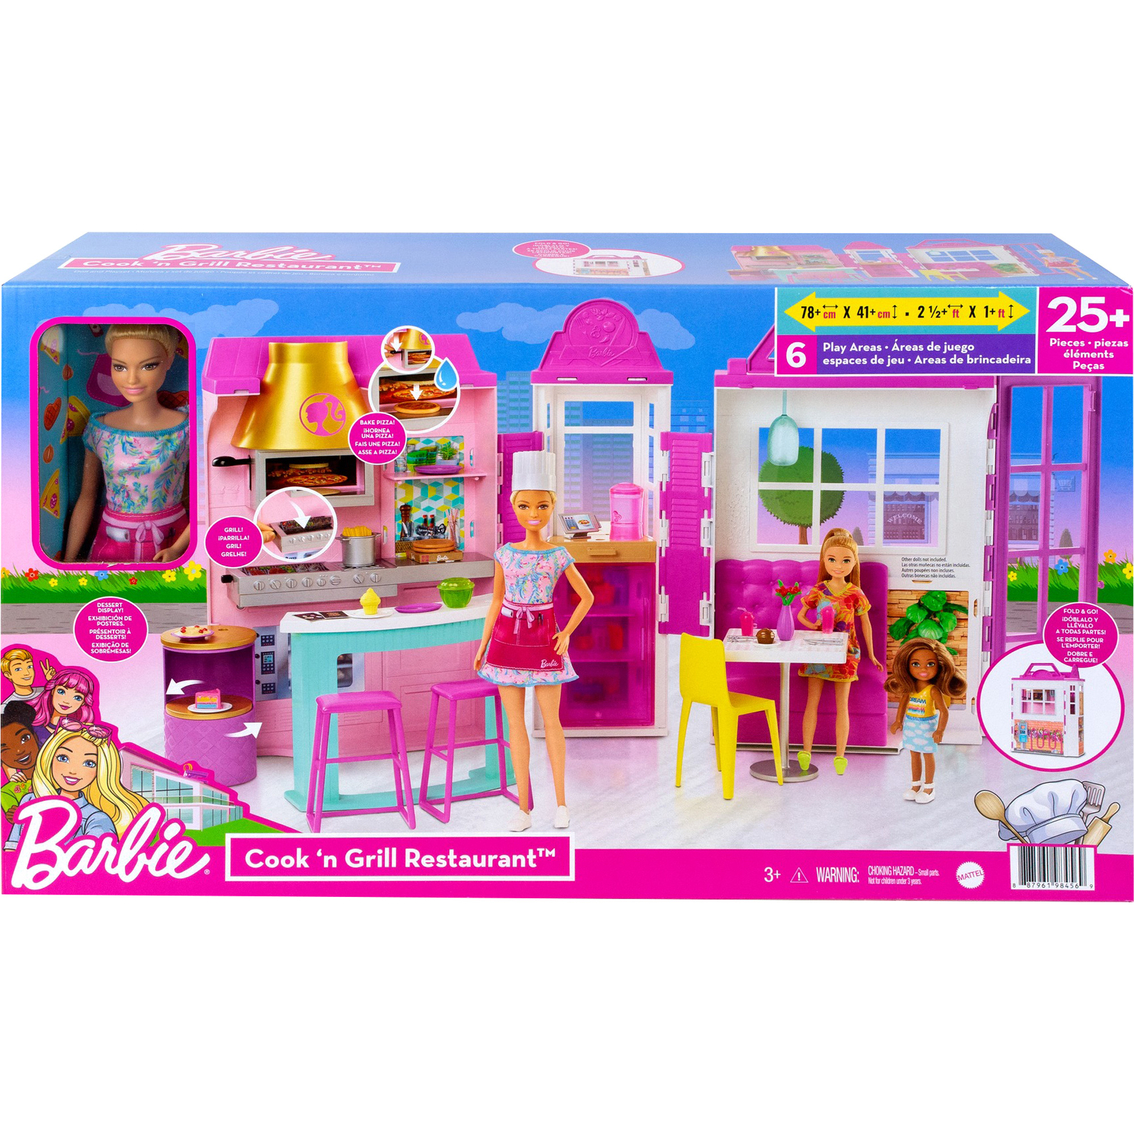 Barbie Cooking Baking Chef Storytelling Doll and Play Set